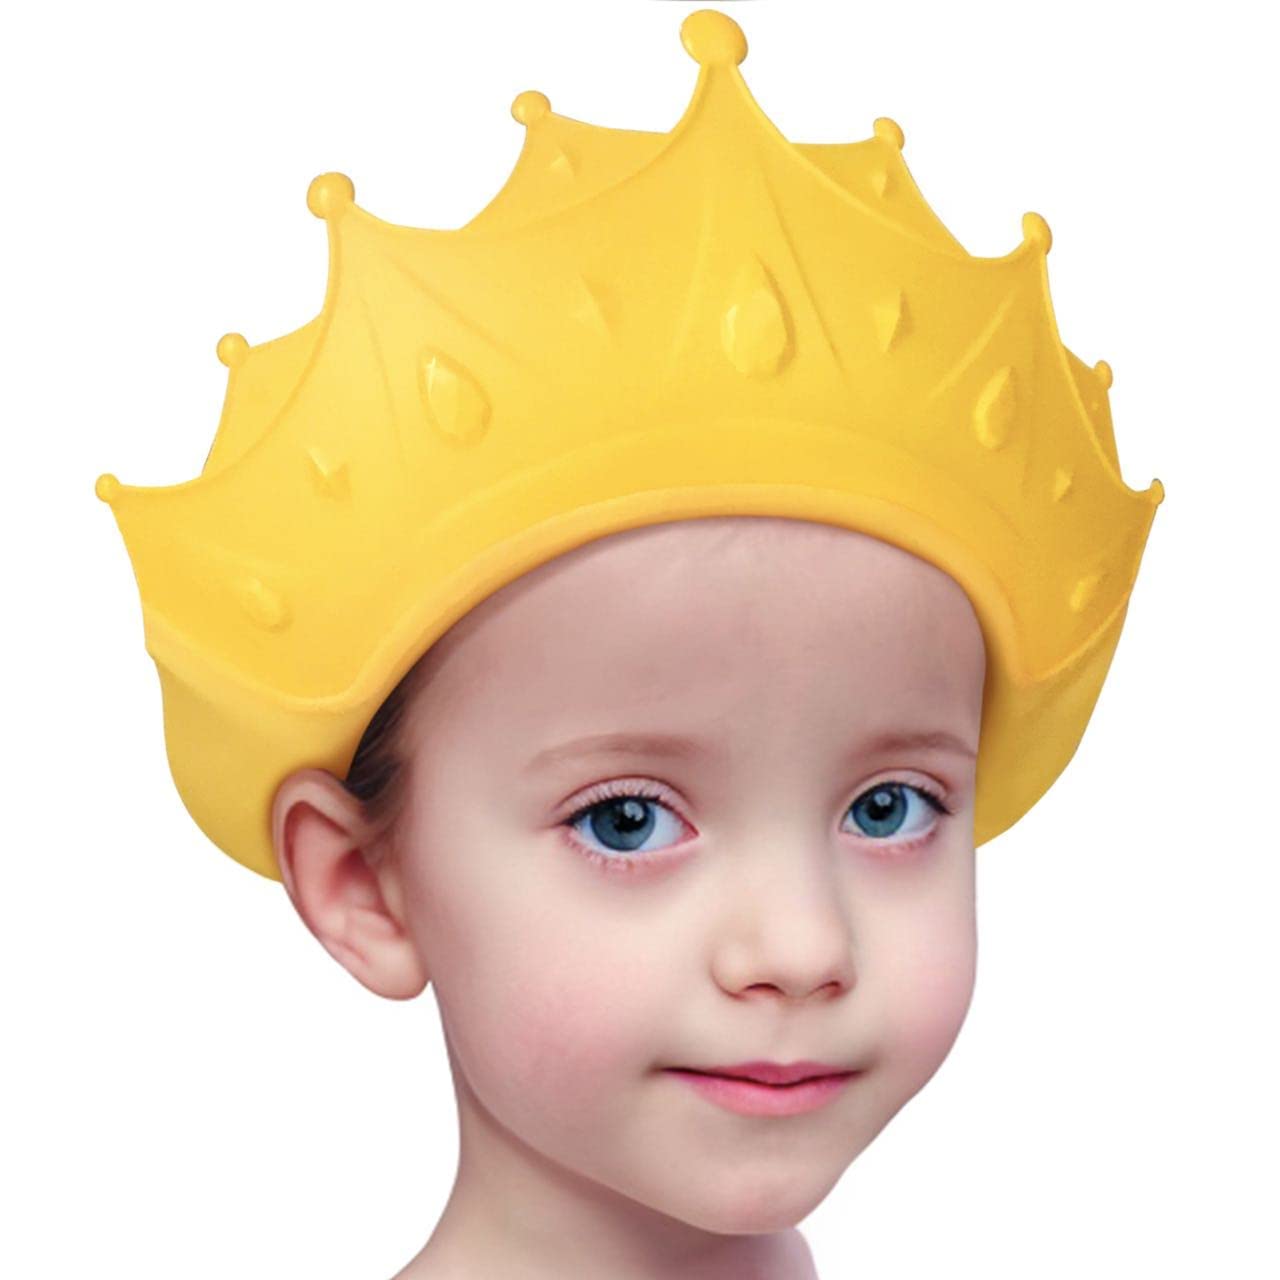 Baby Shower Cap Waterproof Shampoo hat for Children Toddler Girls Boys Protect ears eyes.Adjustable Silicone Bathing Crown.